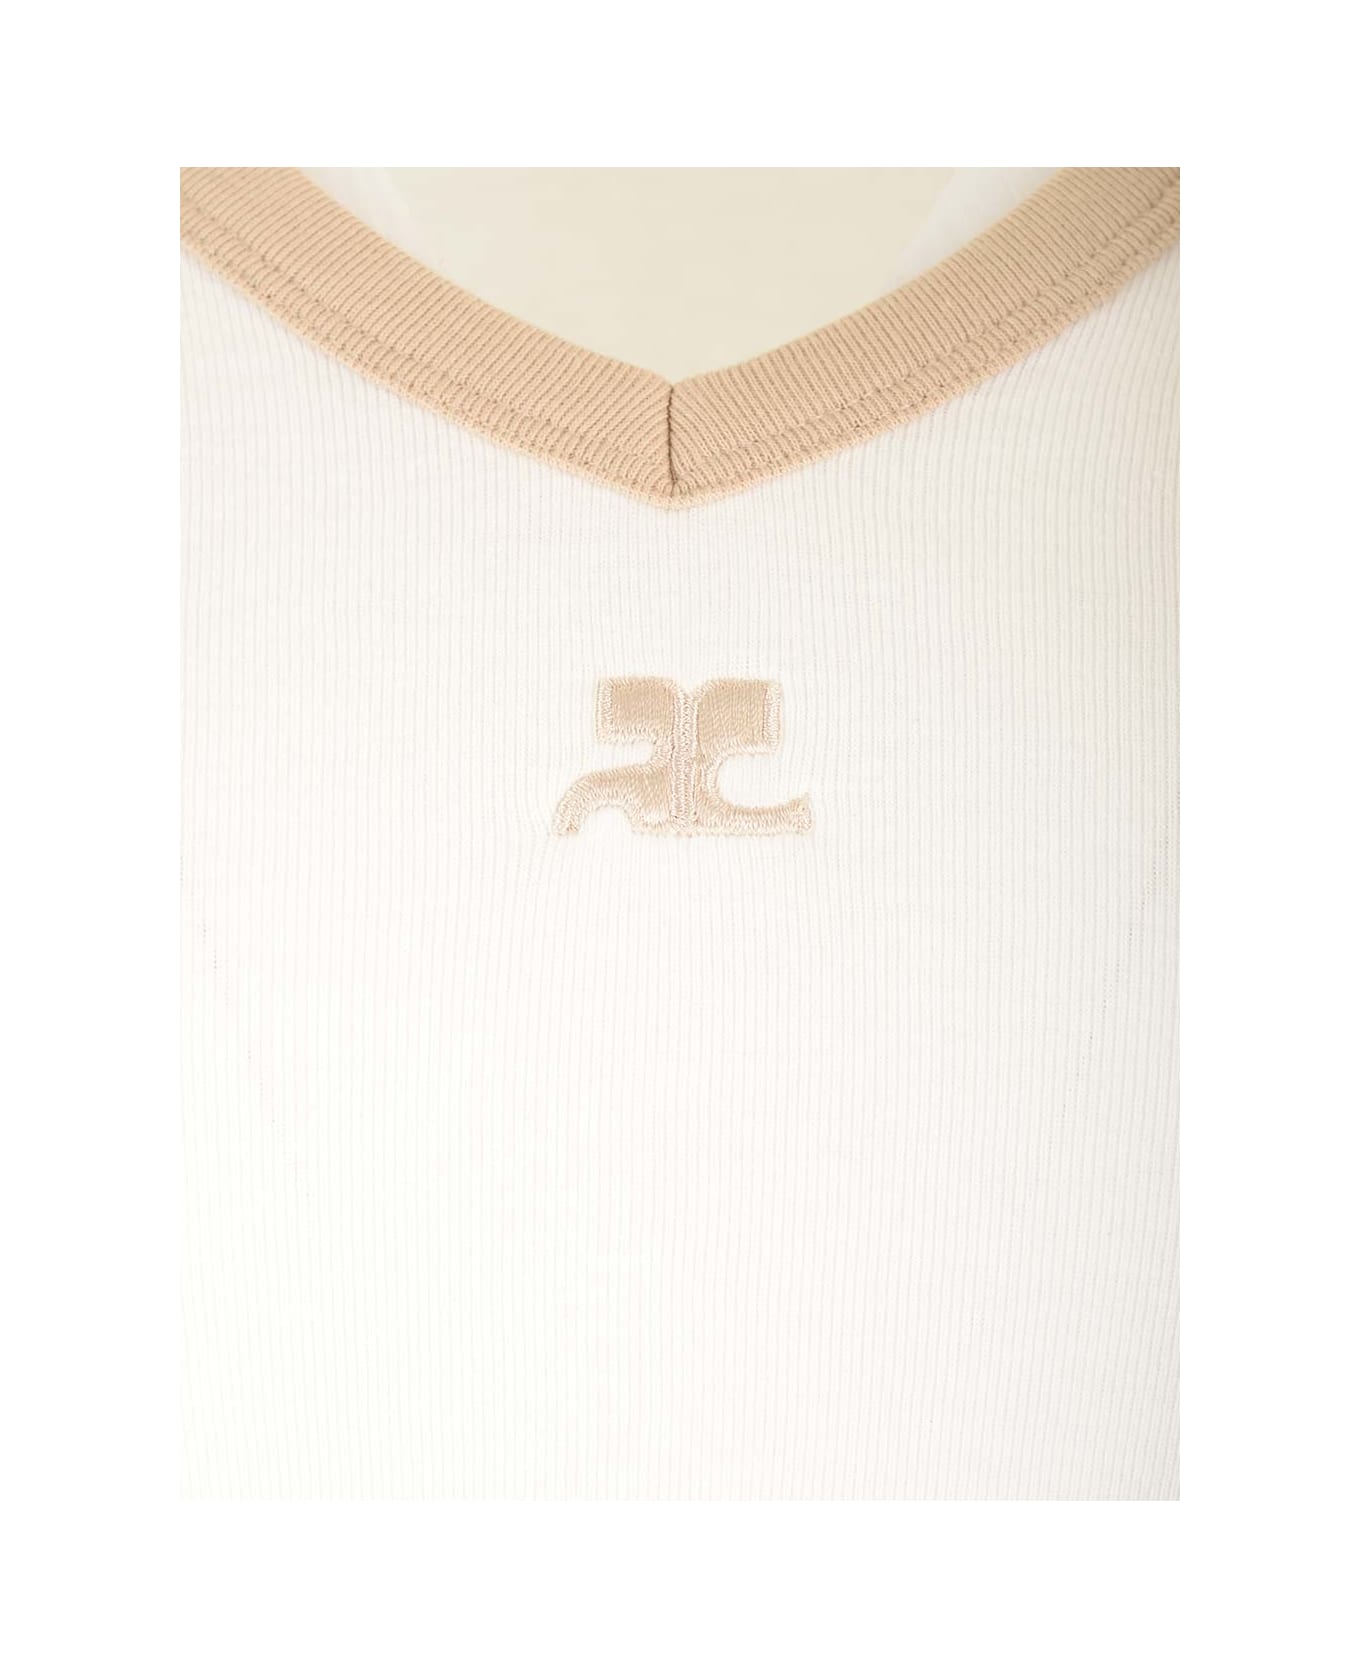 Courrèges T-shirt With Contrasting Hems - WHITE Tシャツ